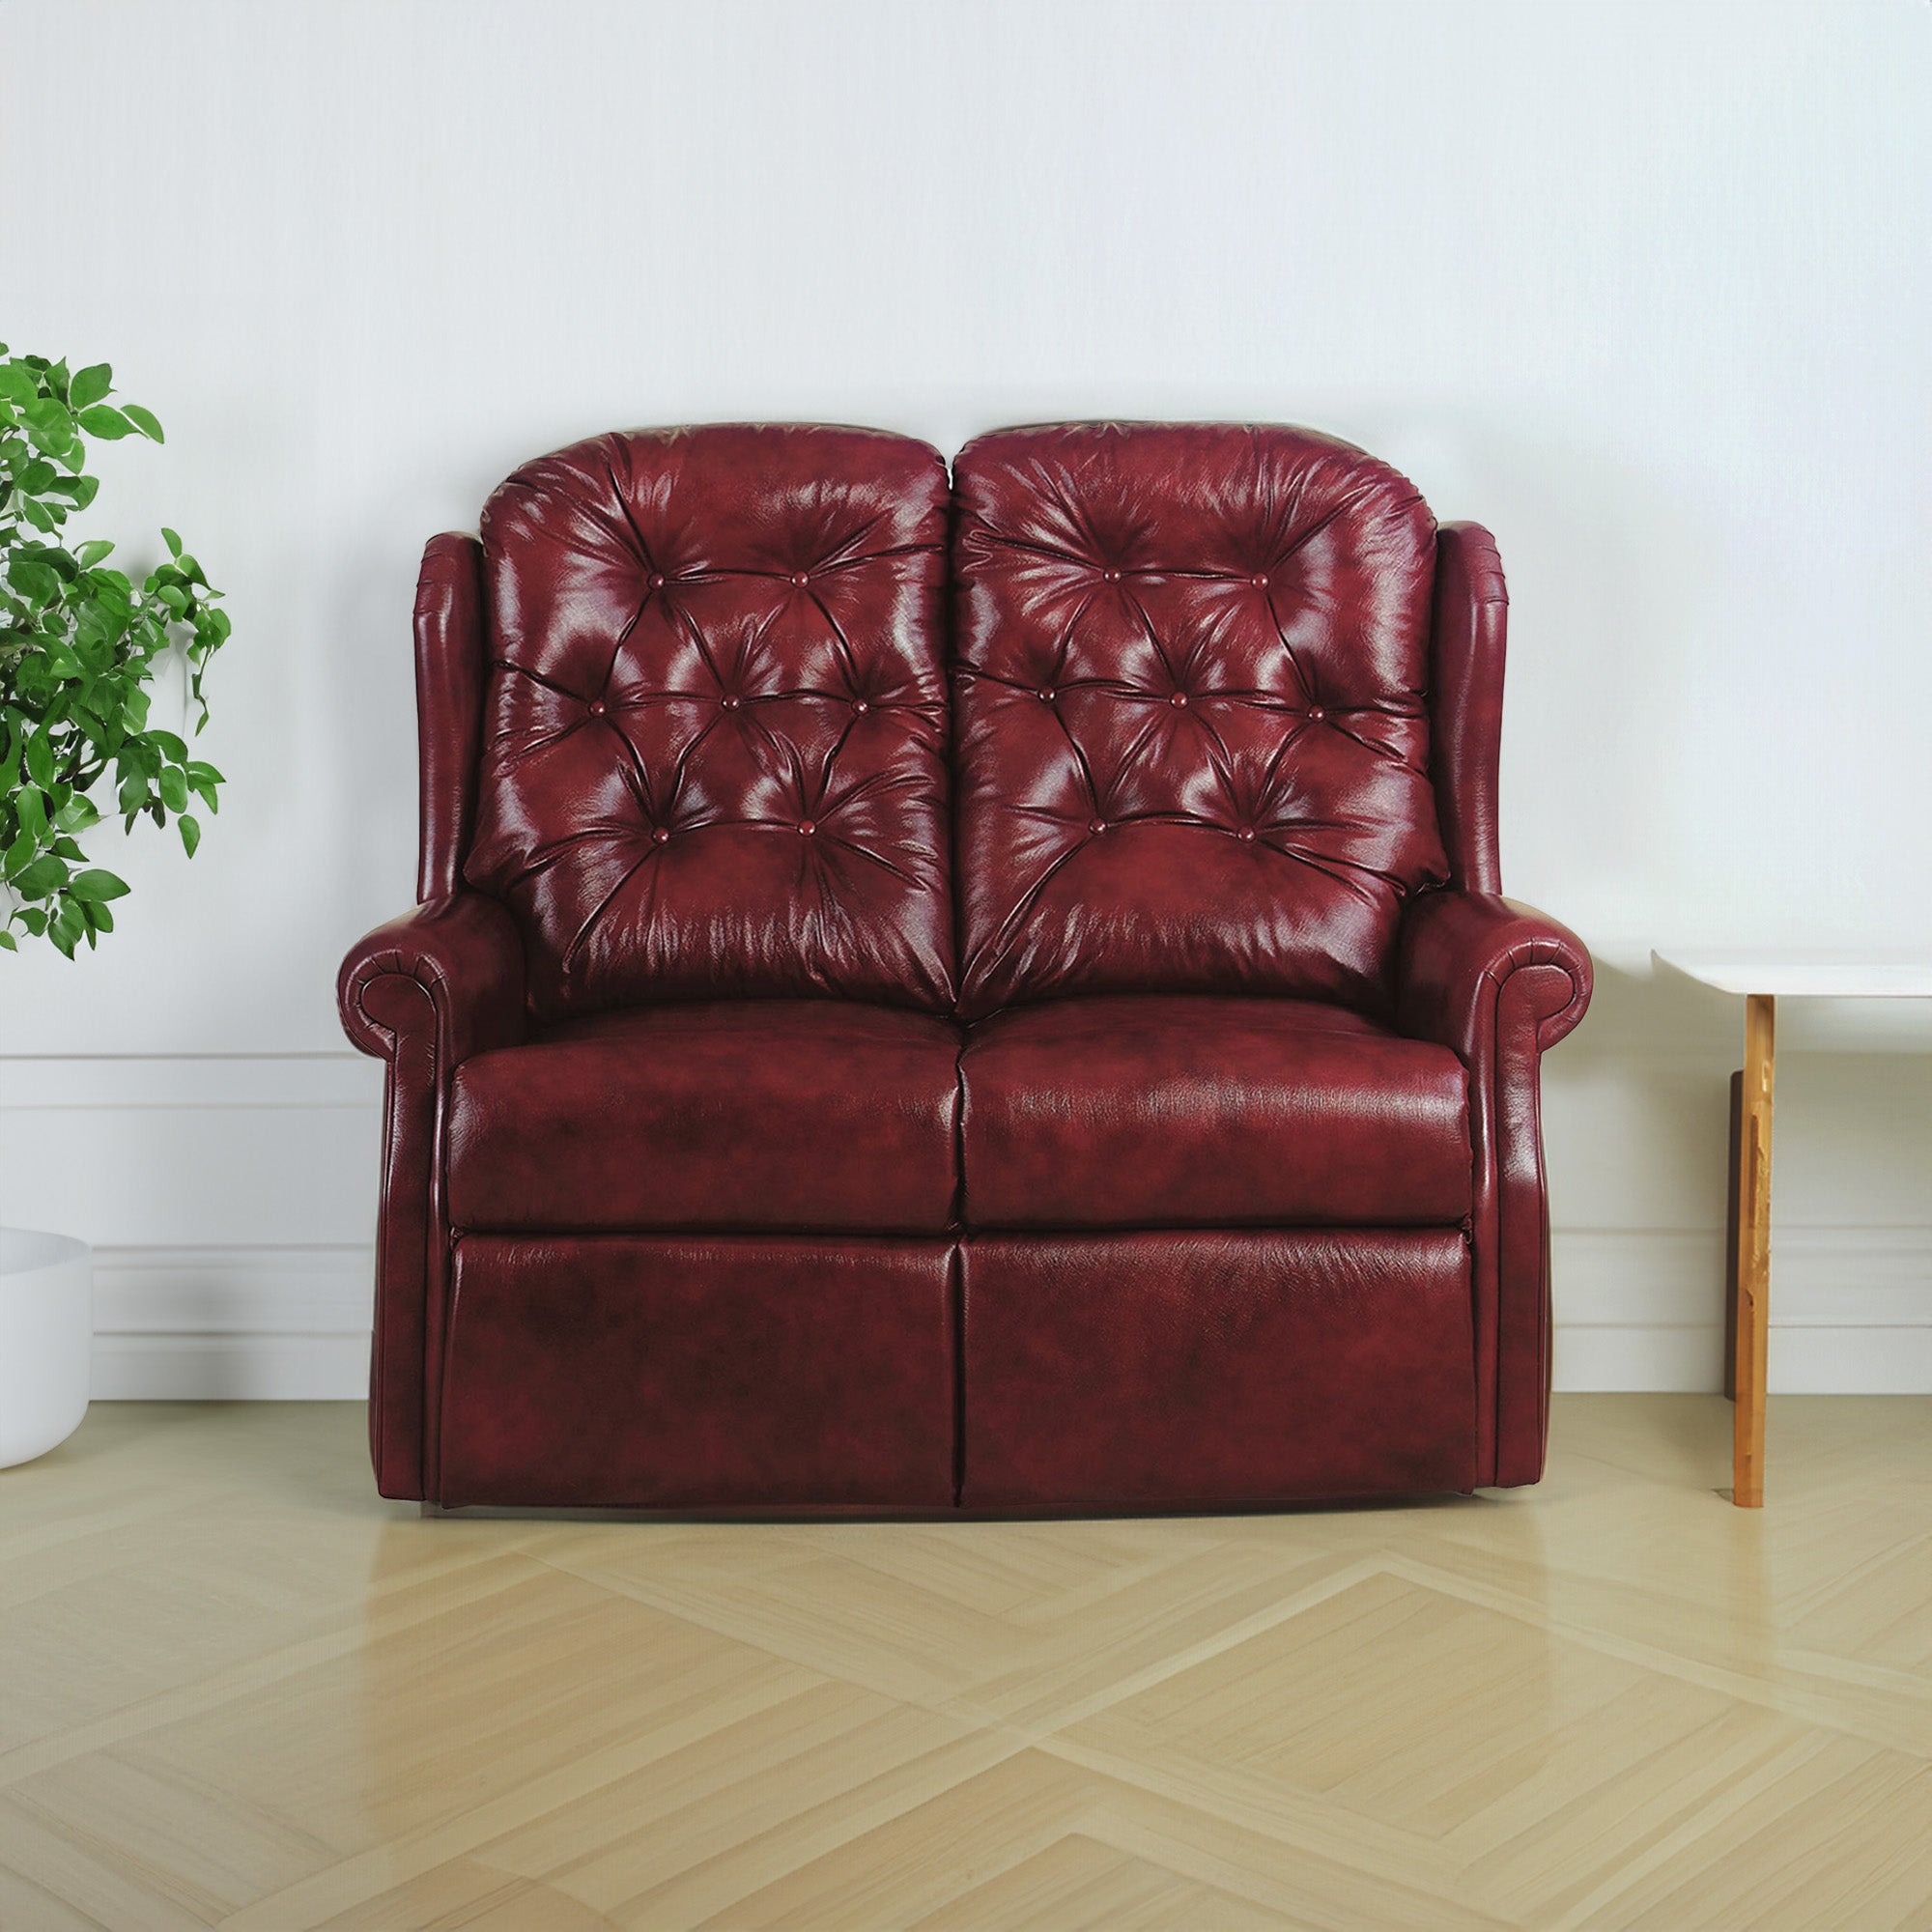 Standard Fixed 2 Seat Settee In Leather